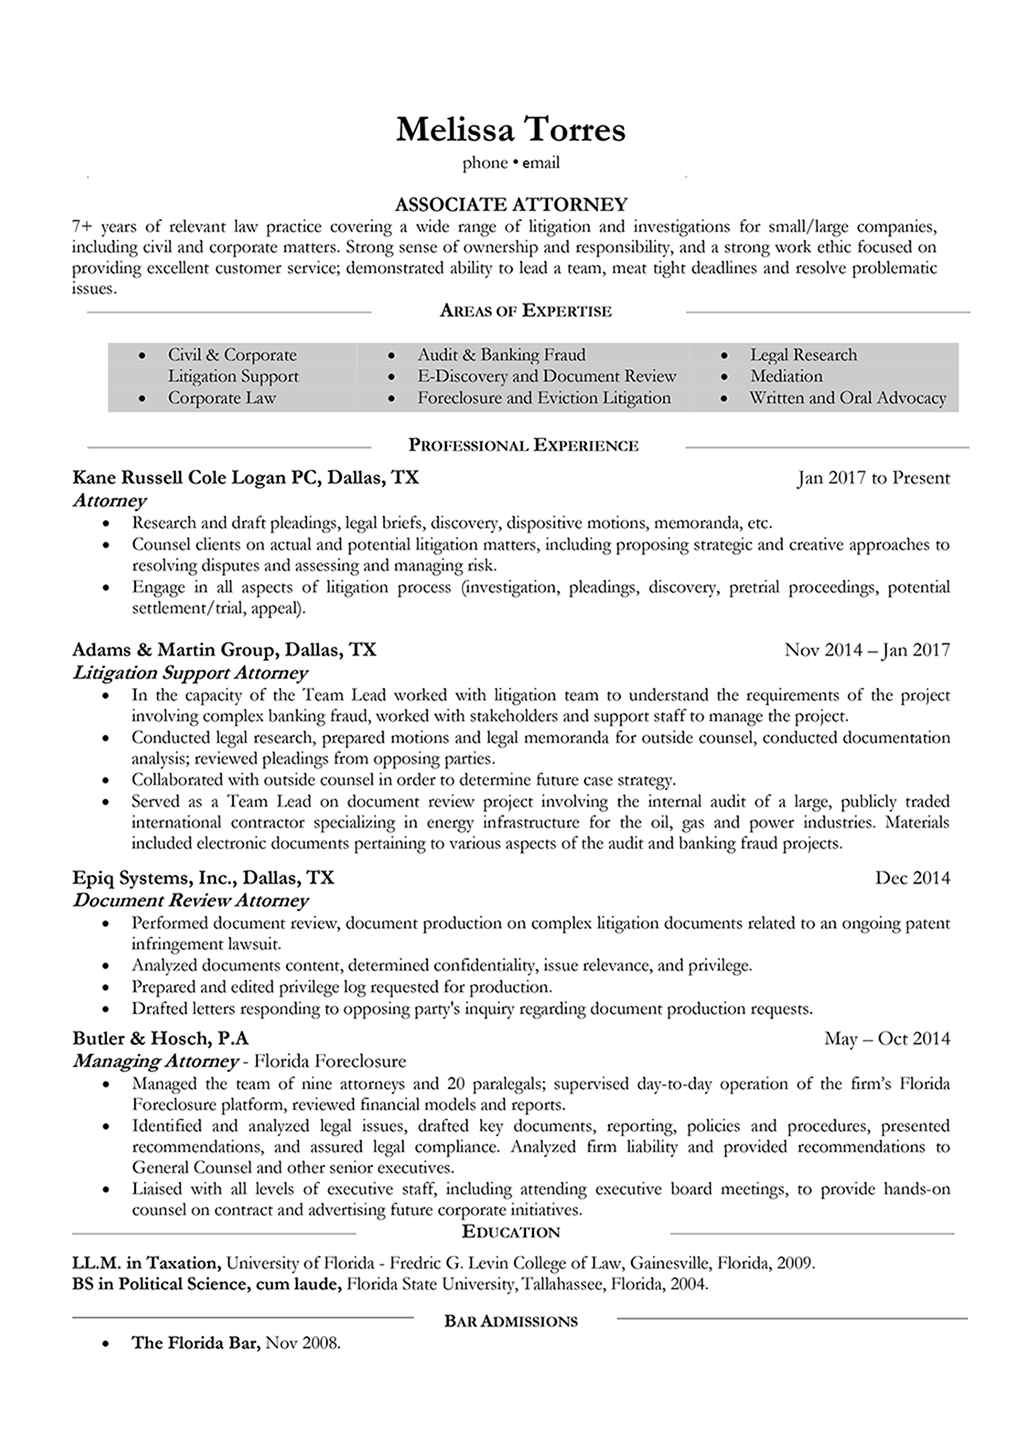 Basic Resume Examples  Attorney Resume Samples And Writing Guide 10 Examples Resumeyard